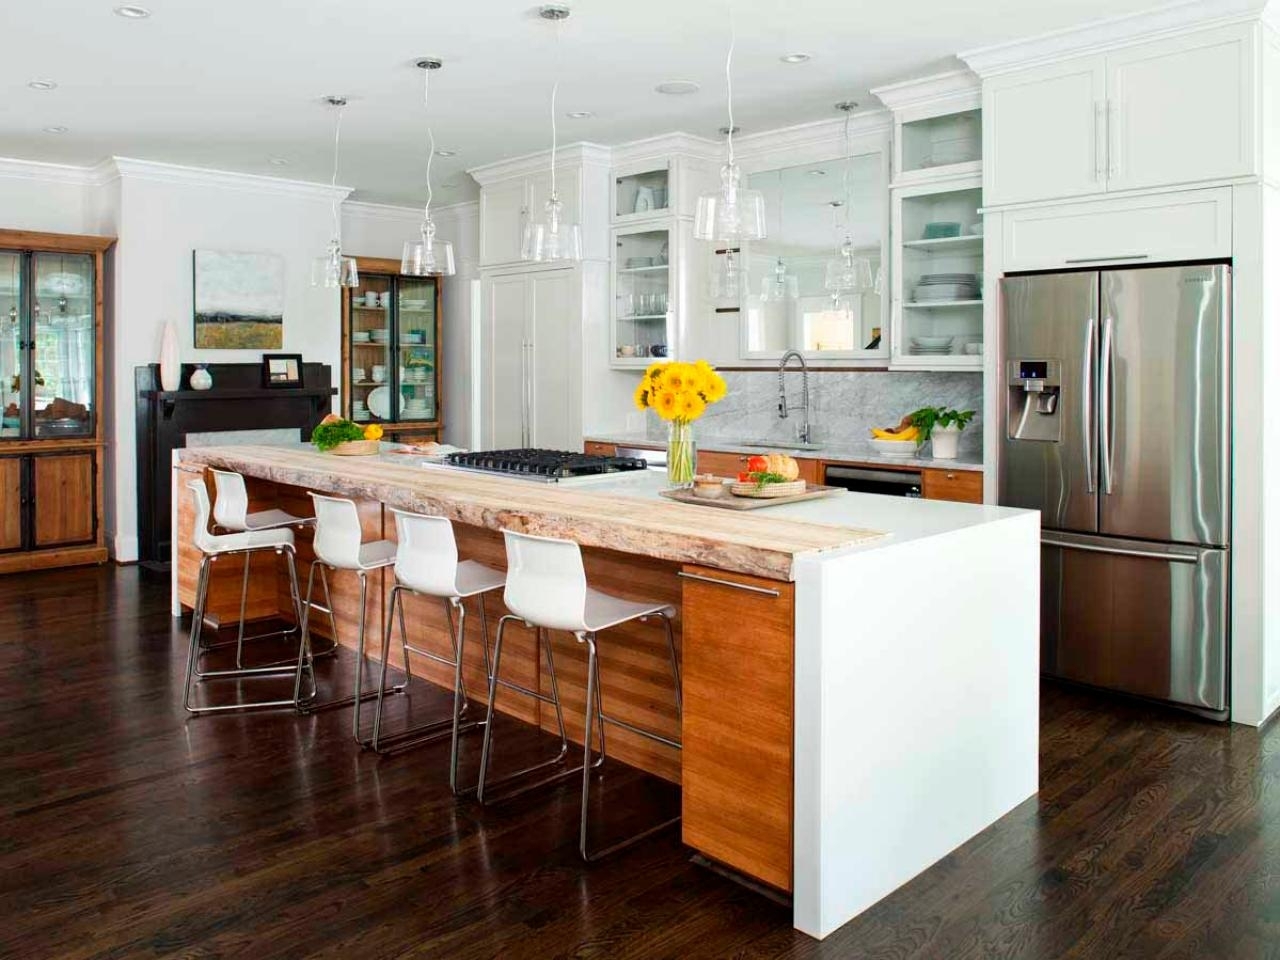 Kitchen Islands With Seating Pictures Ideas From Hgtv Hgtv 